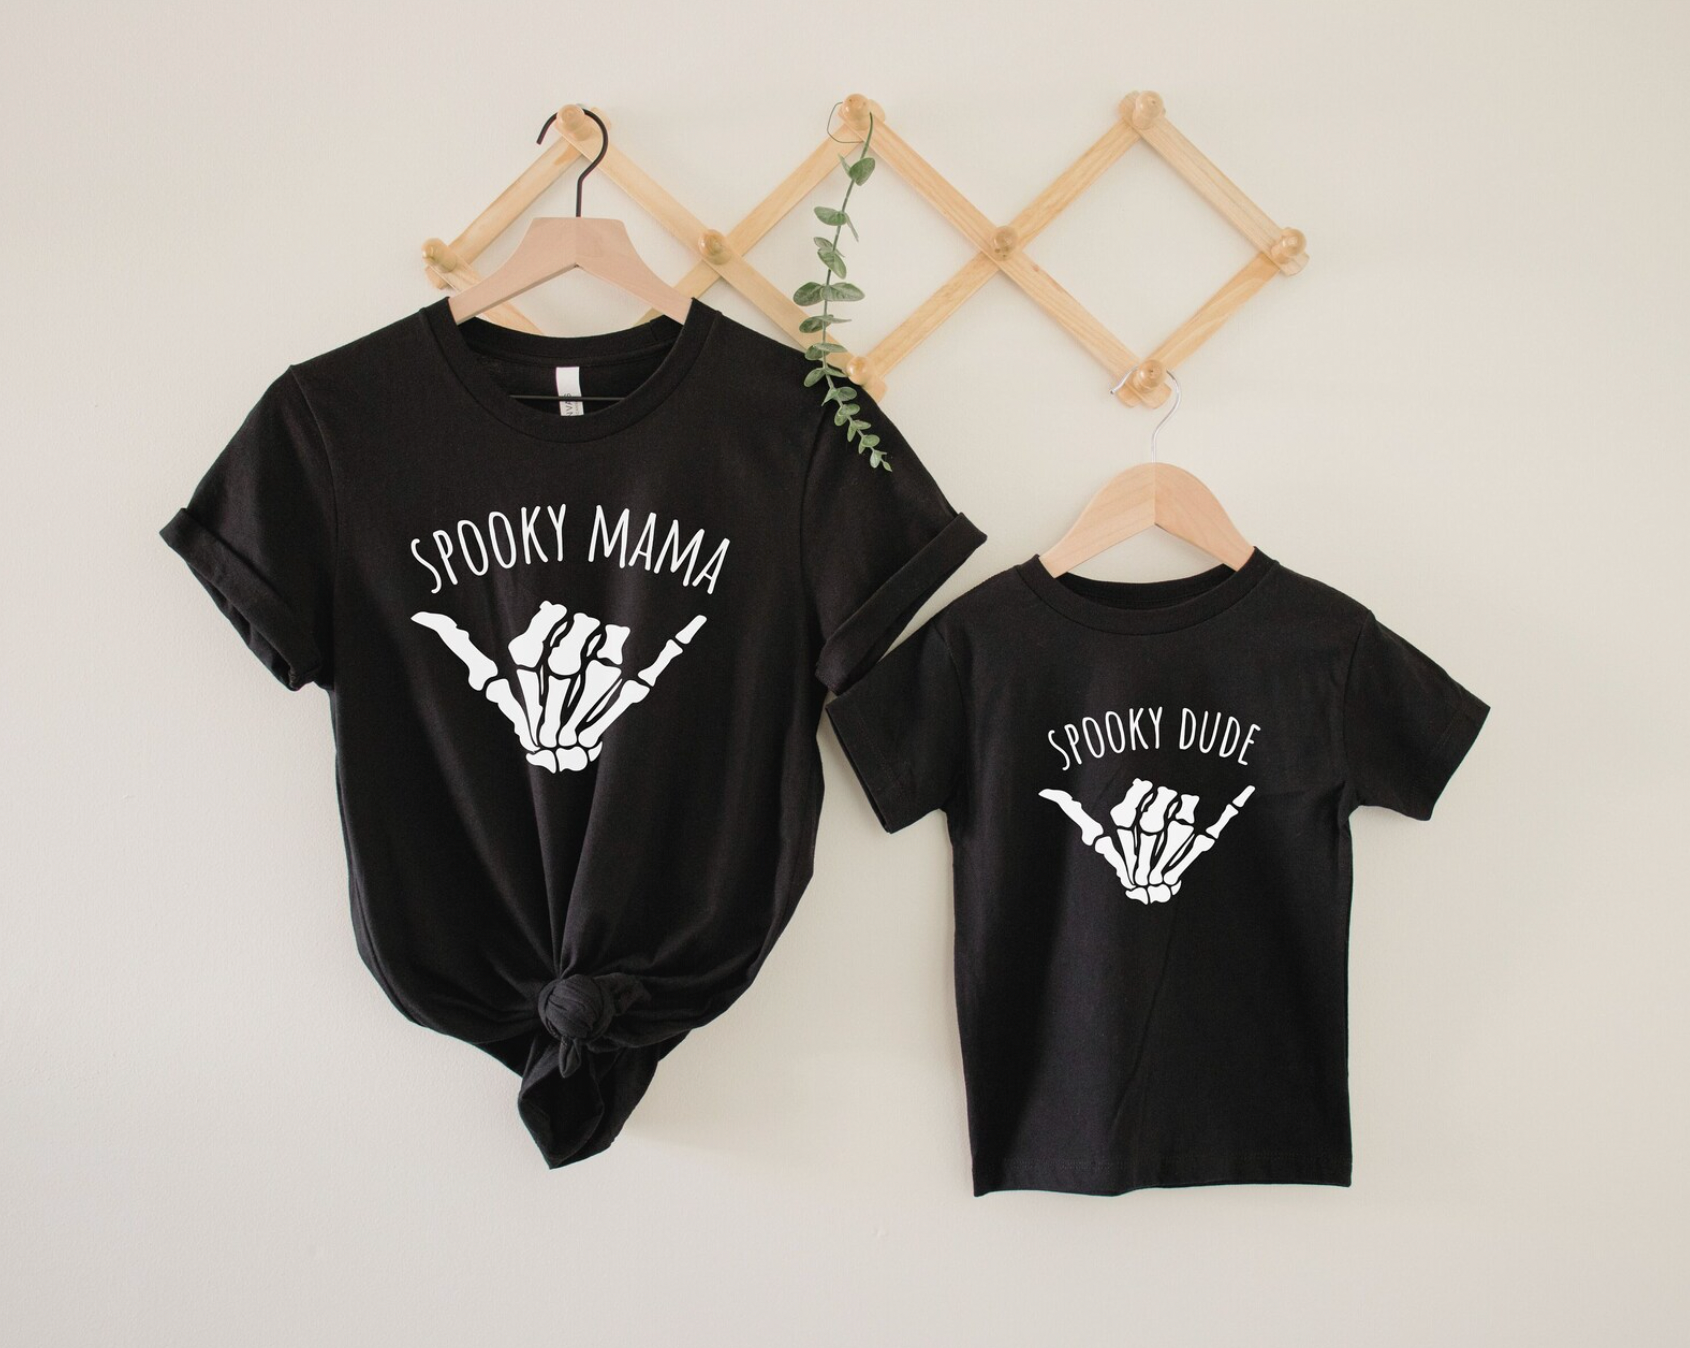 Spooky Mama Spooky Dude Mommy and Me Matching Black Halloween Tees